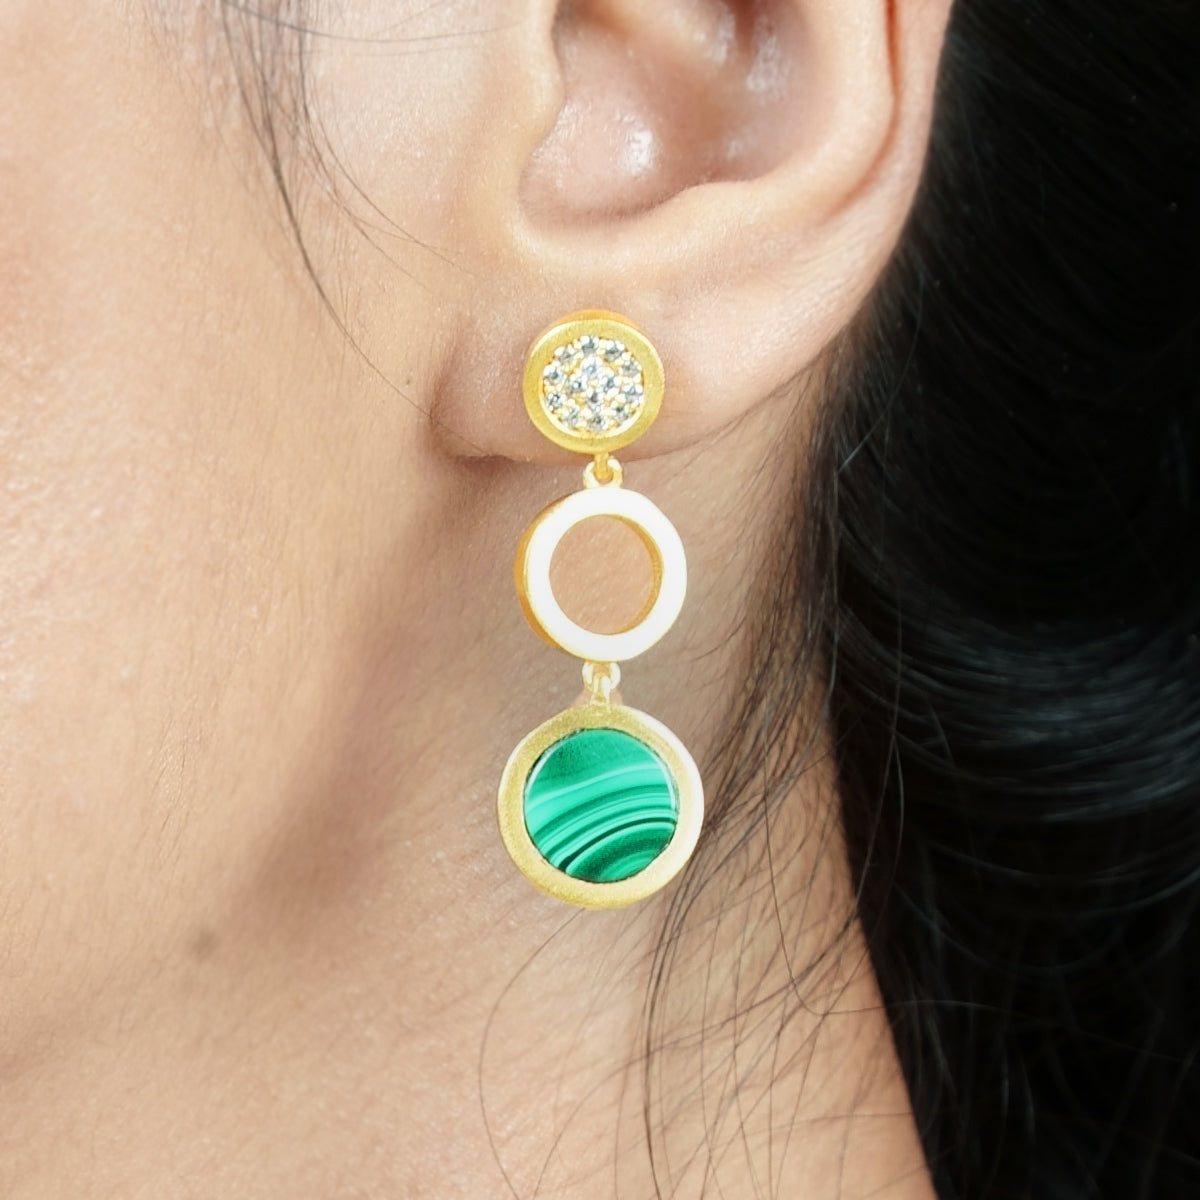 apop nyc Pave CZ Stone Coin Stud Earrings Small India | Ubuy